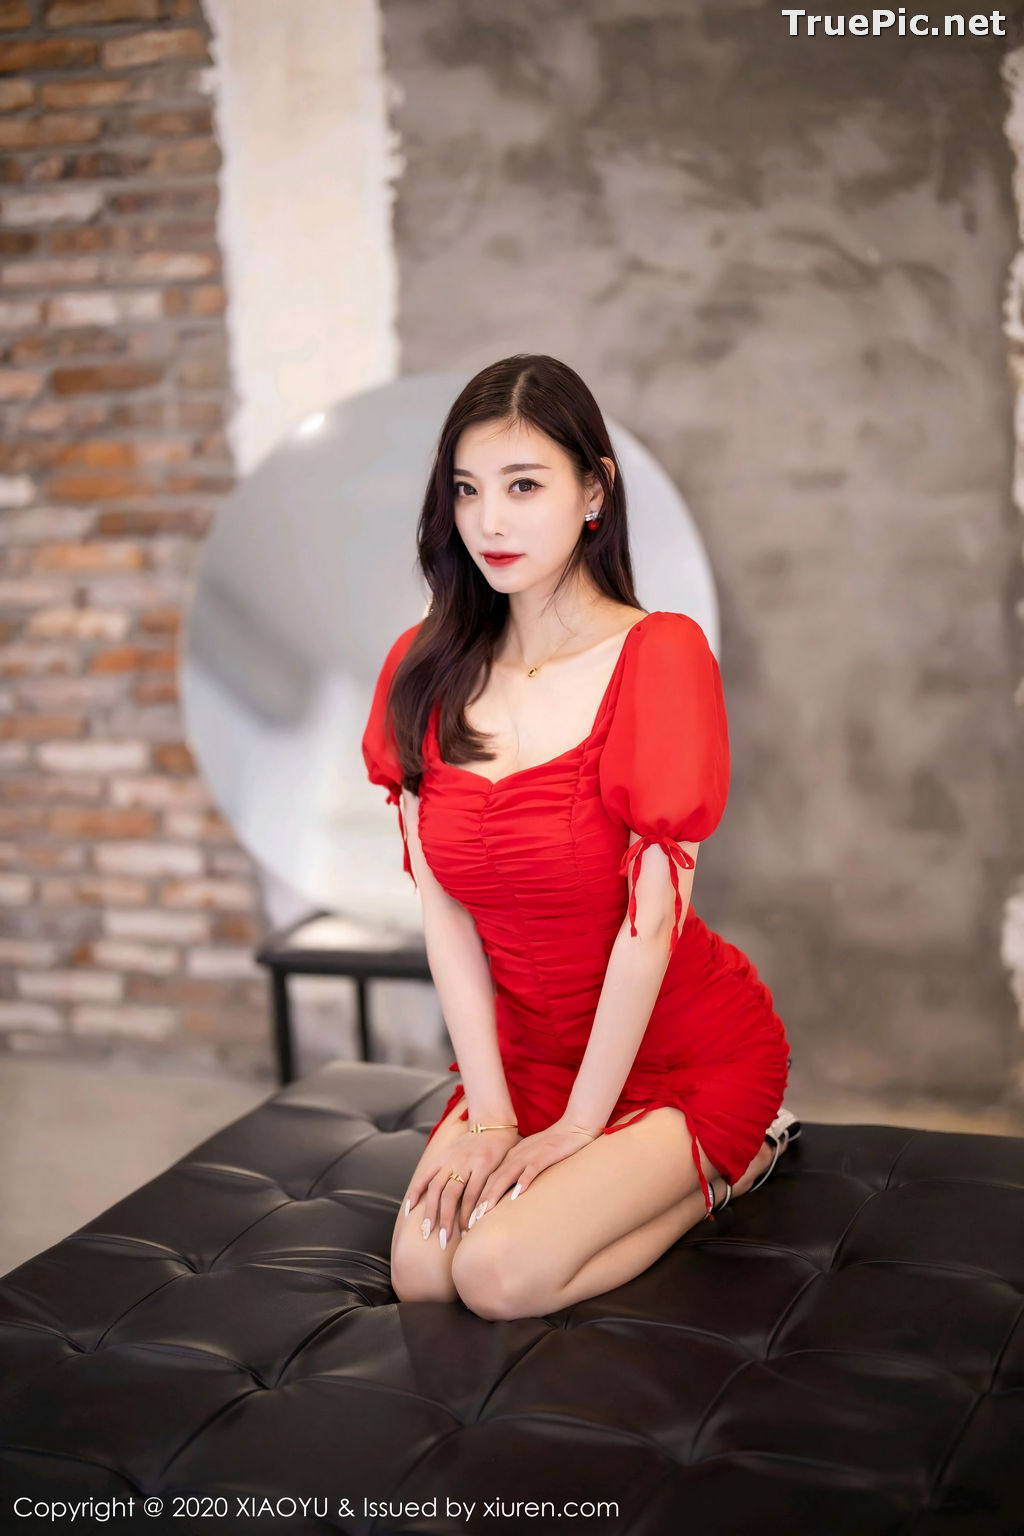 Image XiaoYu Vol.326 - Chinese Model - Yang Chen Chen (杨晨晨sugar) Sexy With Red Bodycon Dress - TruePic.net - Picture-16